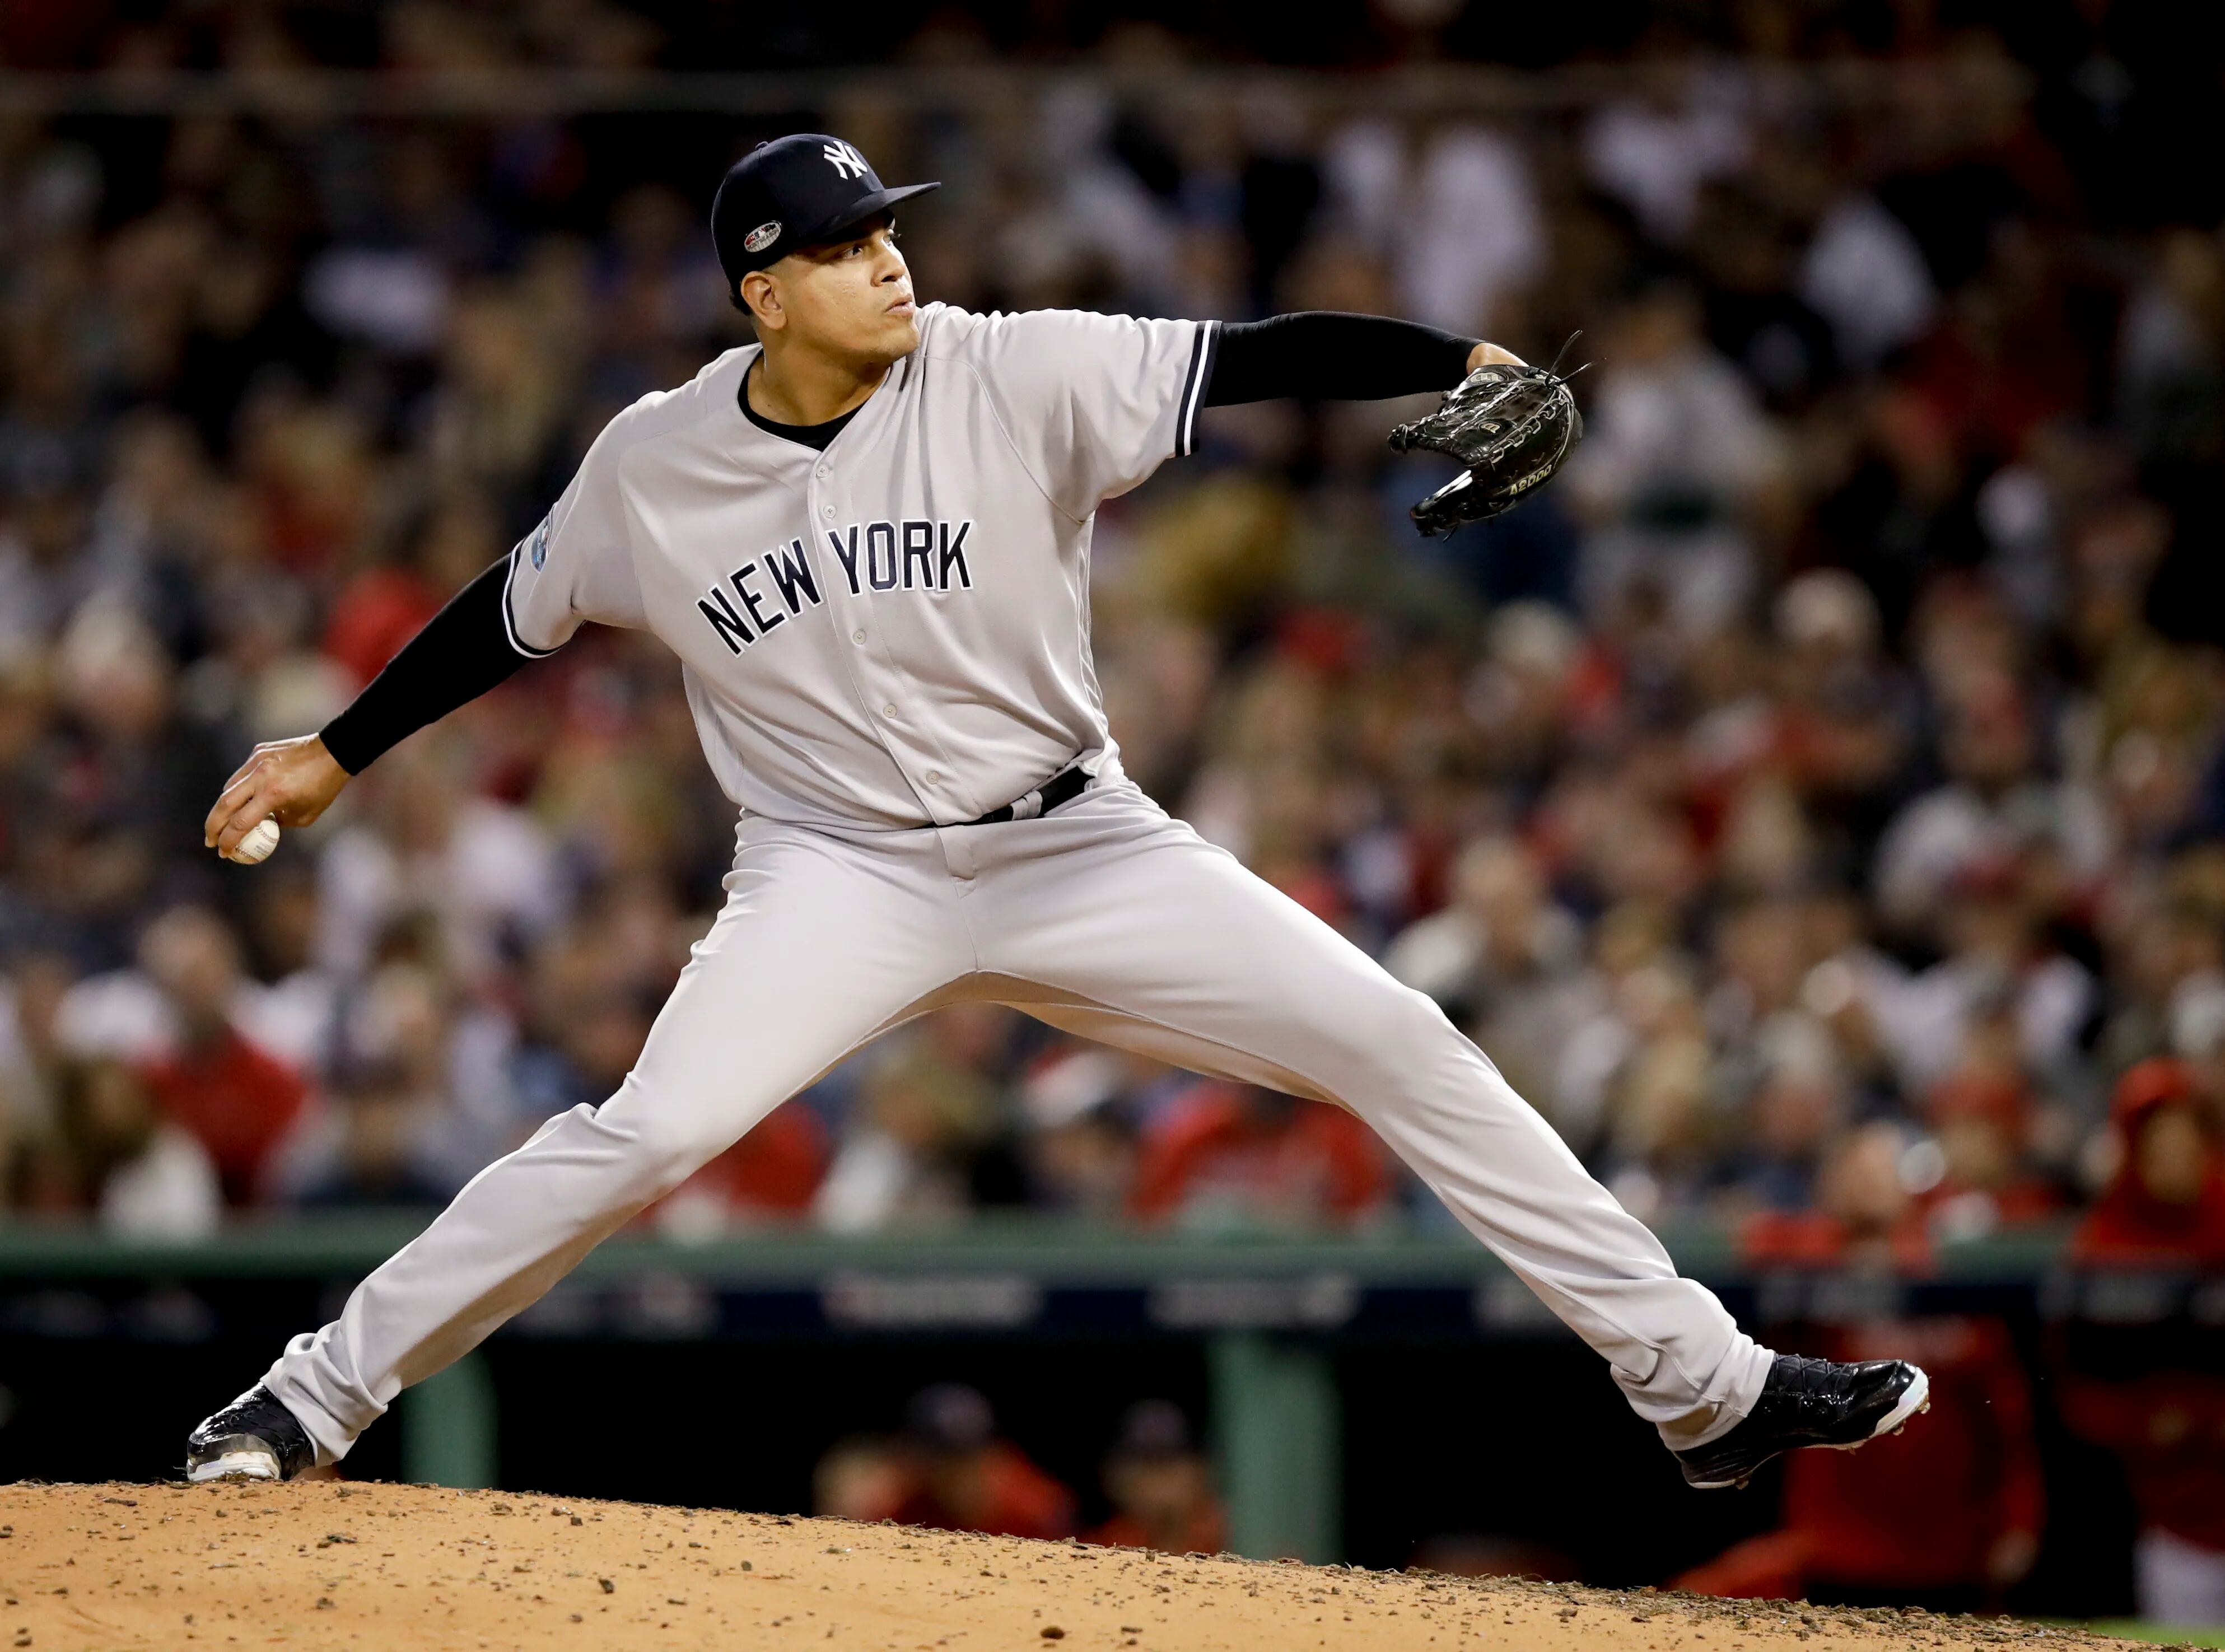 Dellin Betances is once again good enough to close for the Yankees